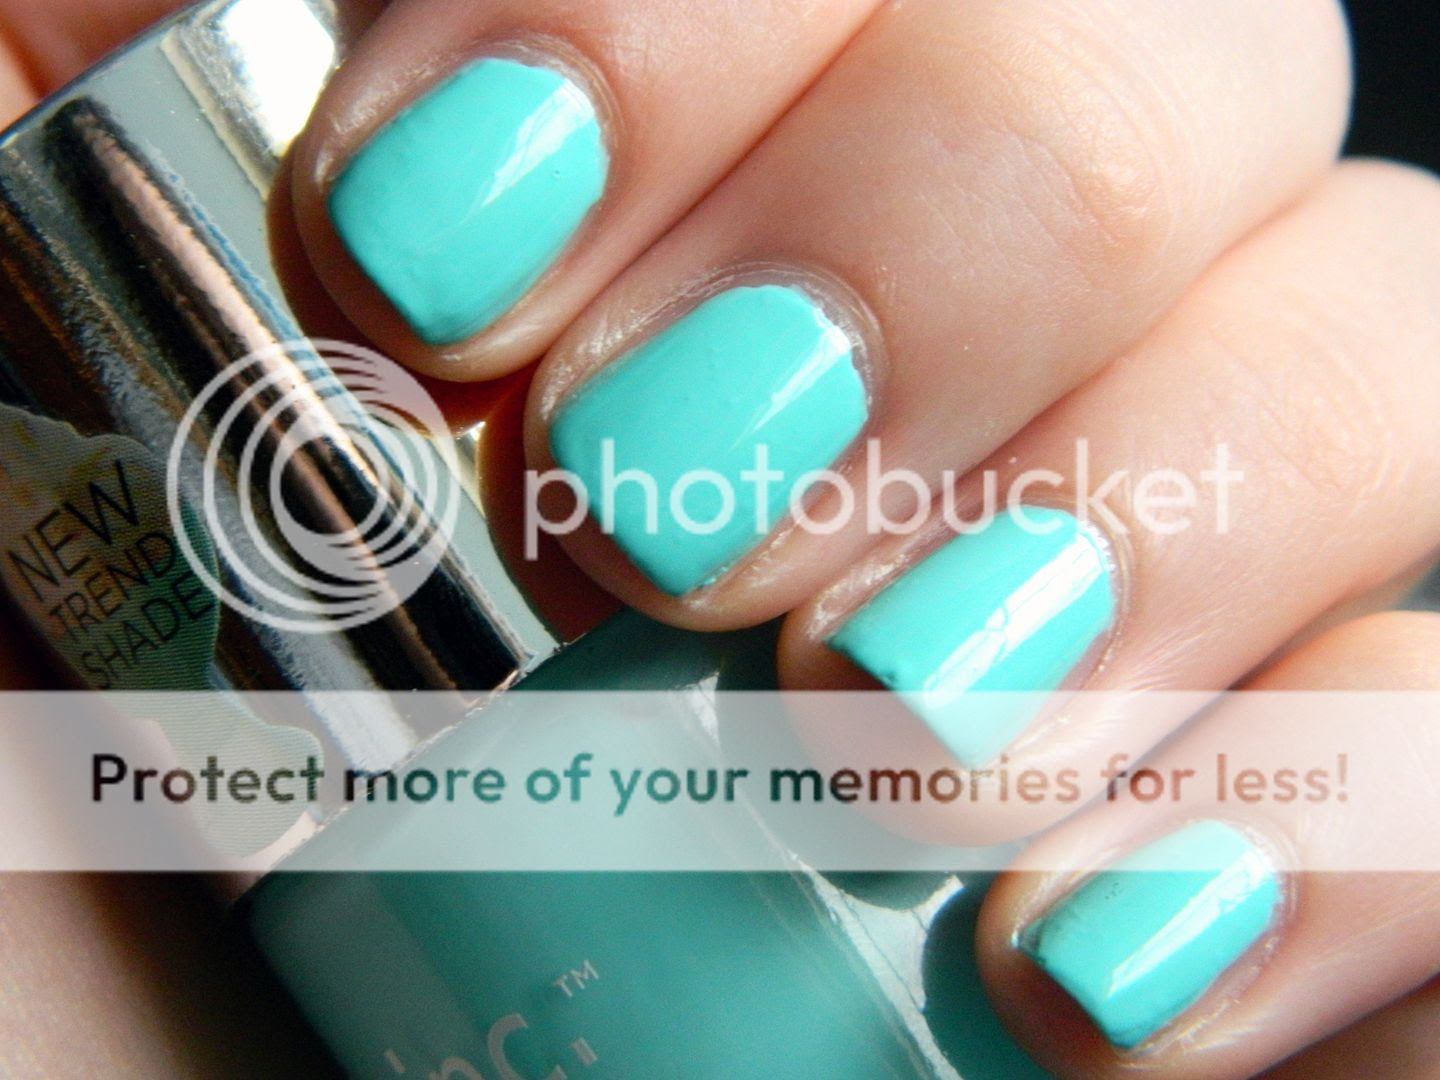 Nails Of The Day Nails Inc Royal Botanical Gardens Summer 2013 Nail Polish Swatch Review Belle-amie